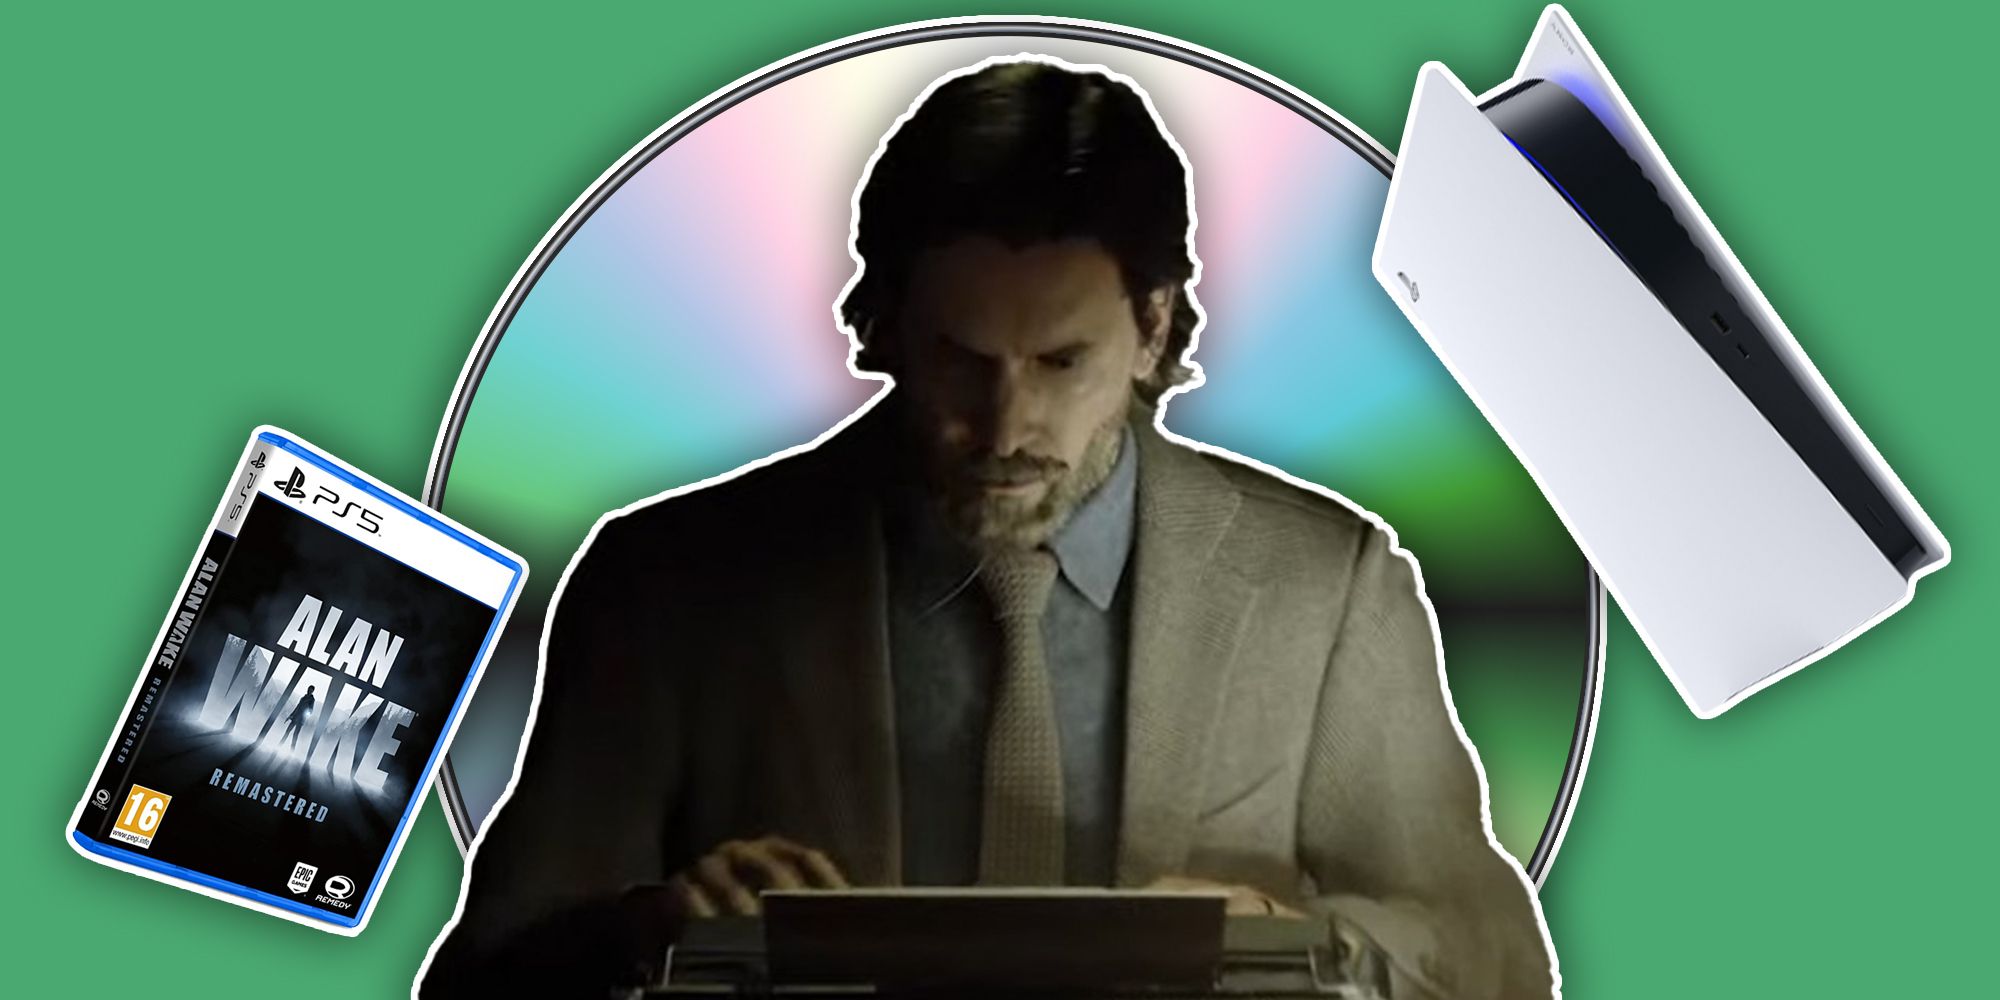 Alan Wake using a typewriter with a game case, a PS5, and a disc in the background.